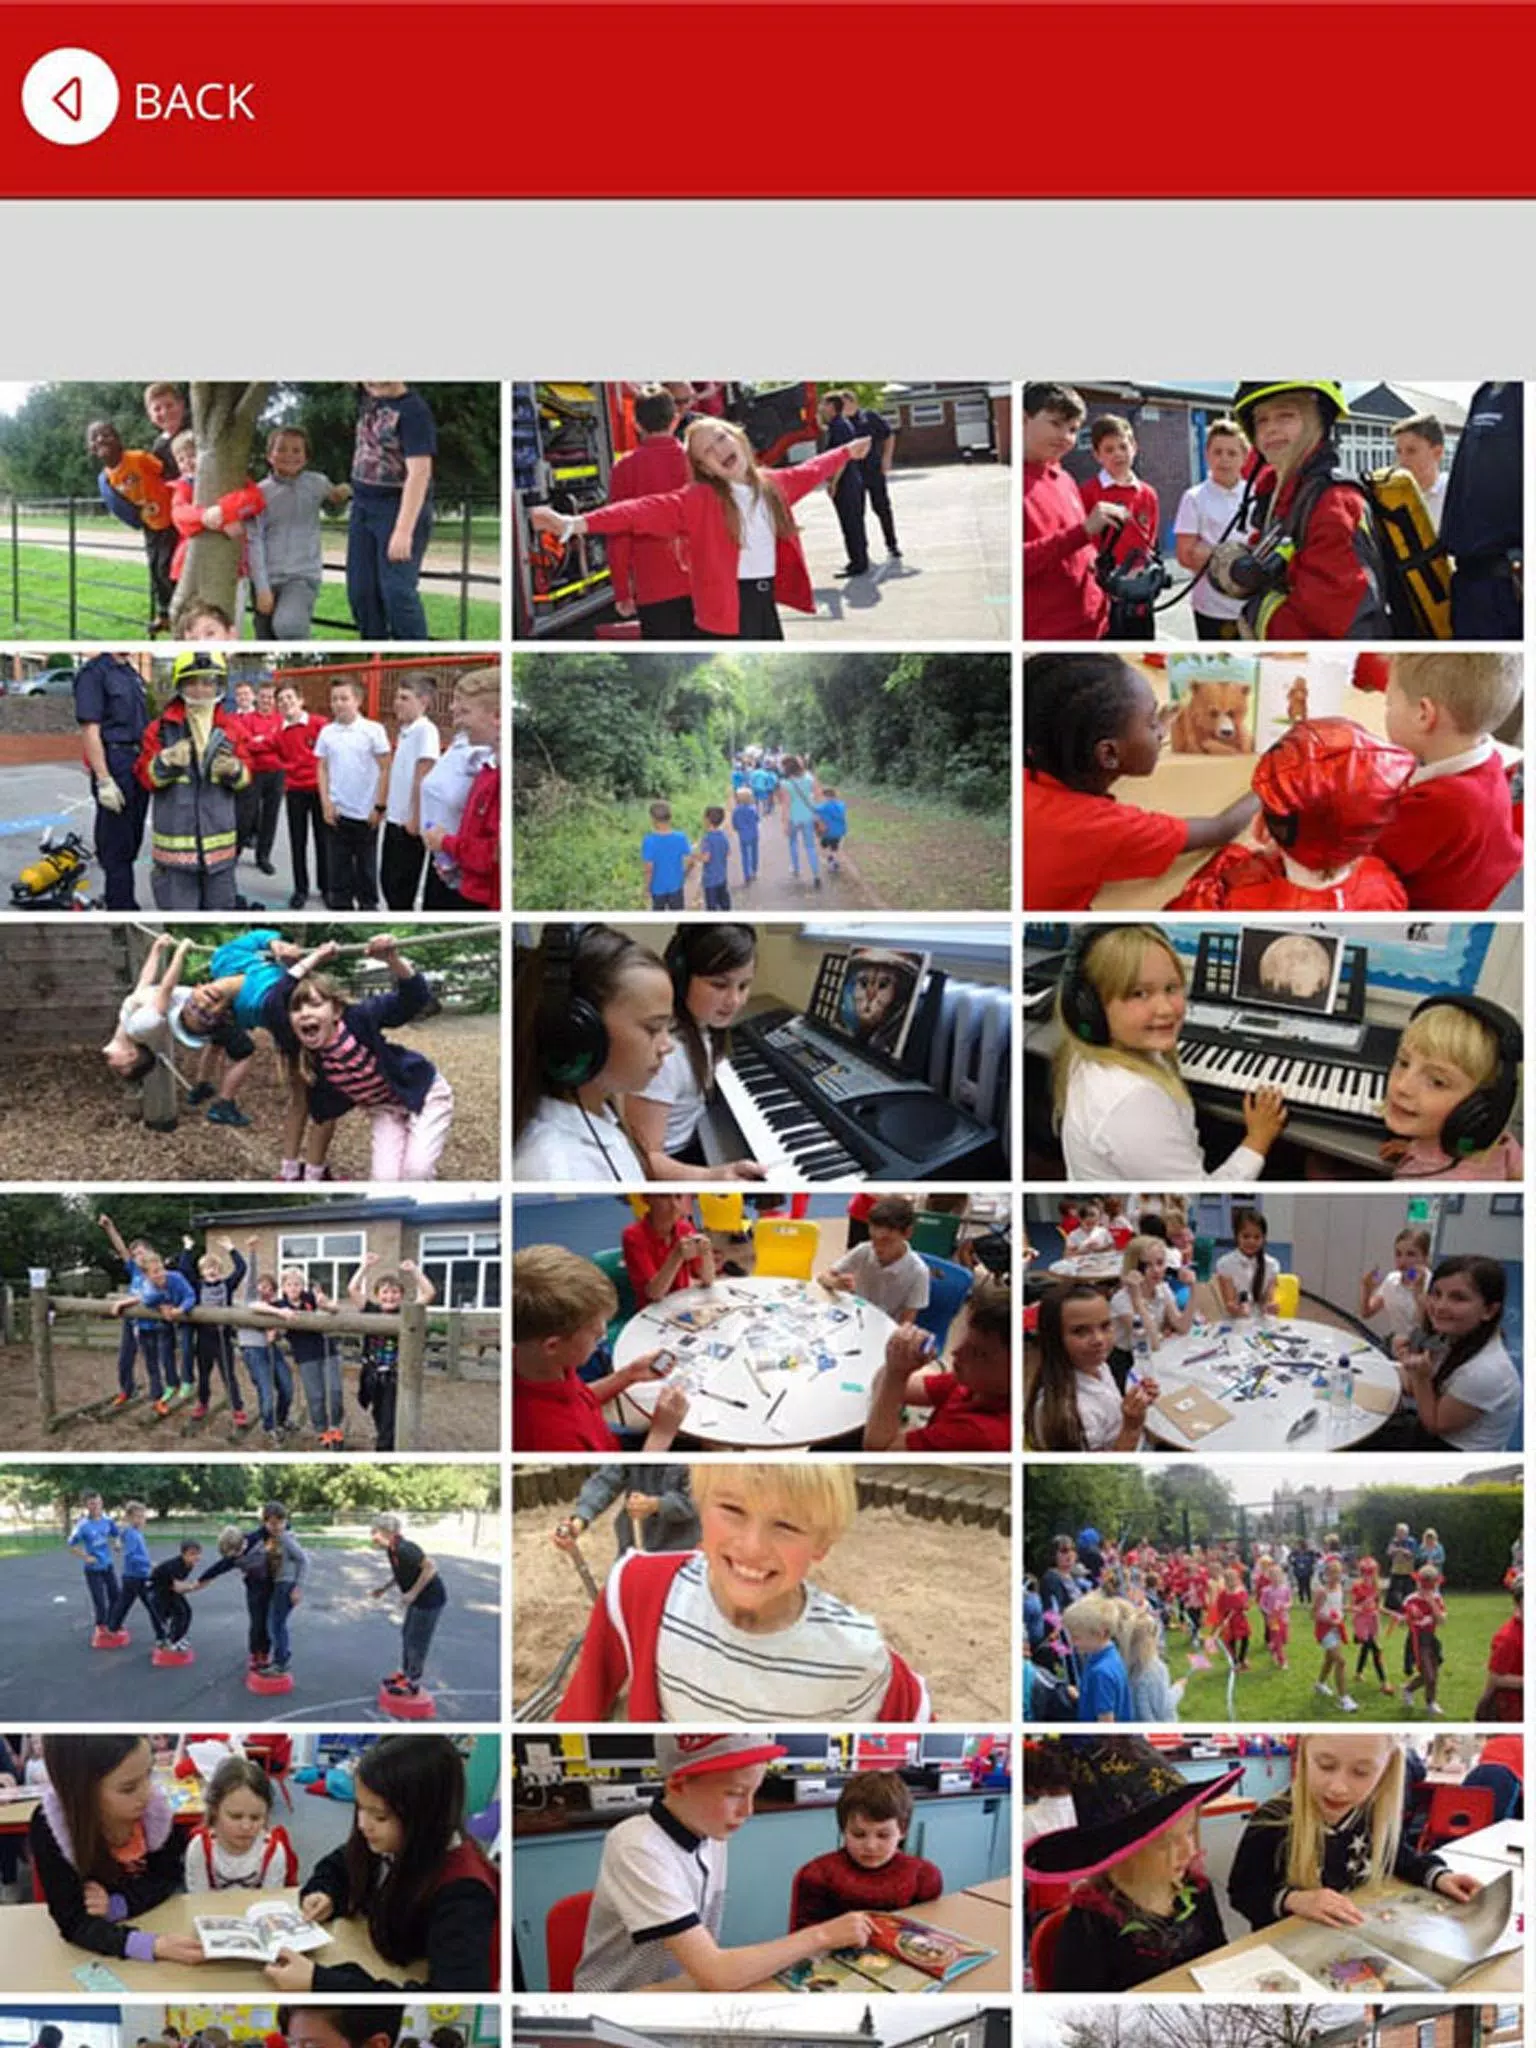 Brickhill Lower School APK (Android App) - Free Download